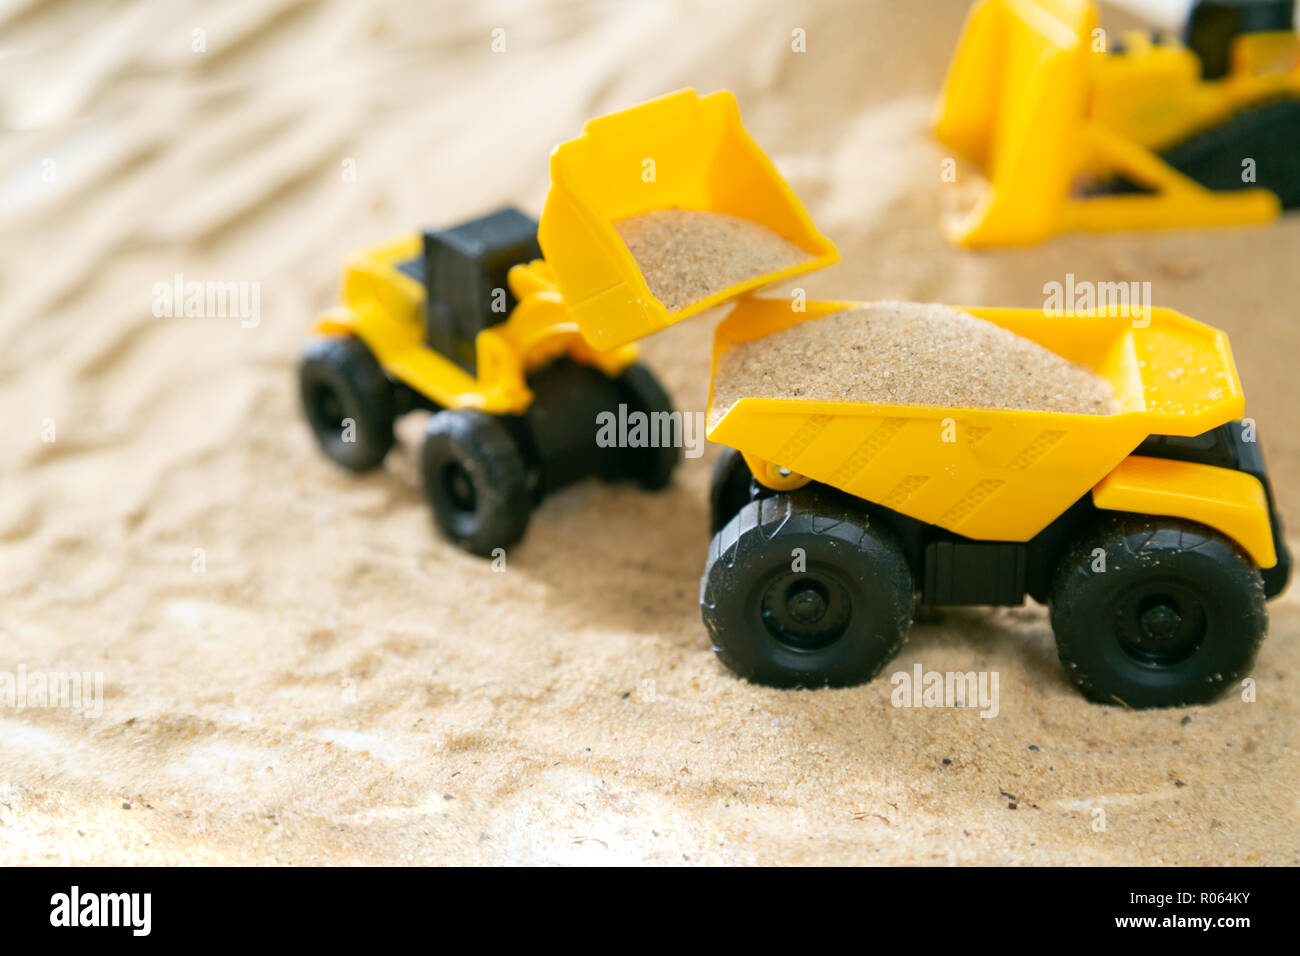 Construction concept - toy model machinery on sald, copy space Stock Photo